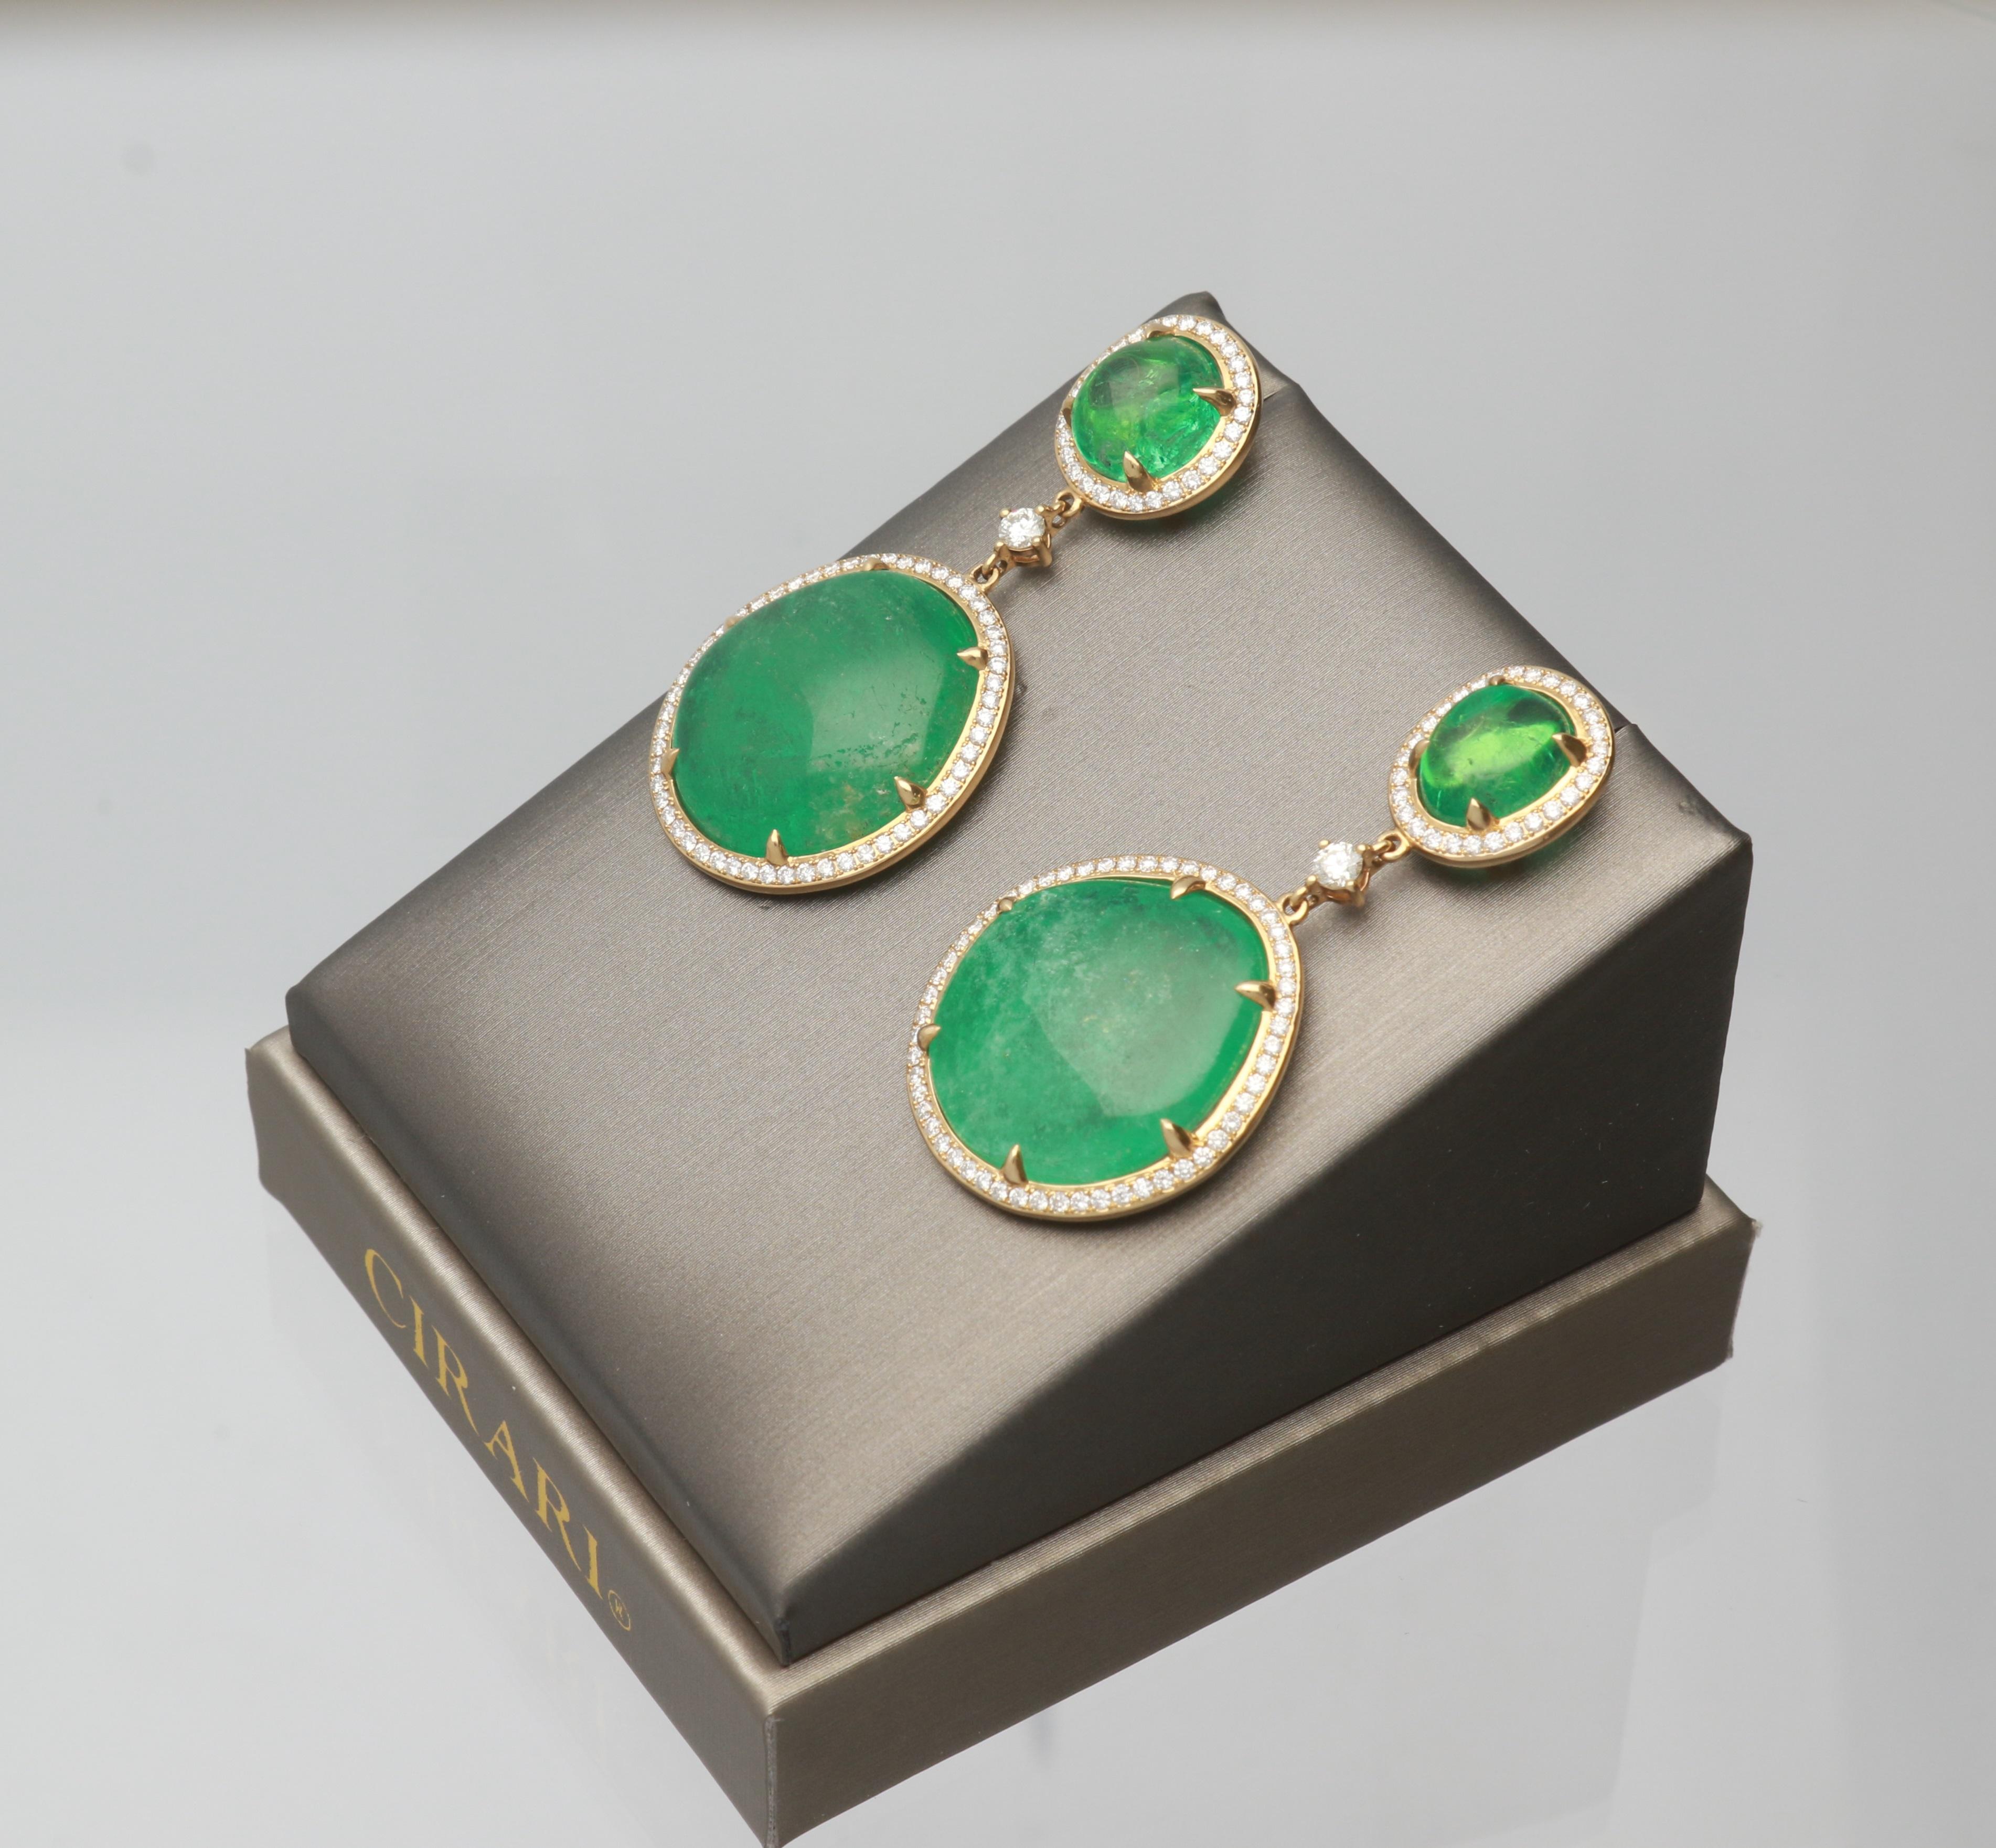 This beautiful one of a kind Earring is crafted in 18-karat yellow Gold and features four near round IGL certified Emeralds of 68.47 Carats and brilliant cut round diamonds. This earring is secured with post back and is a perfect gift either for